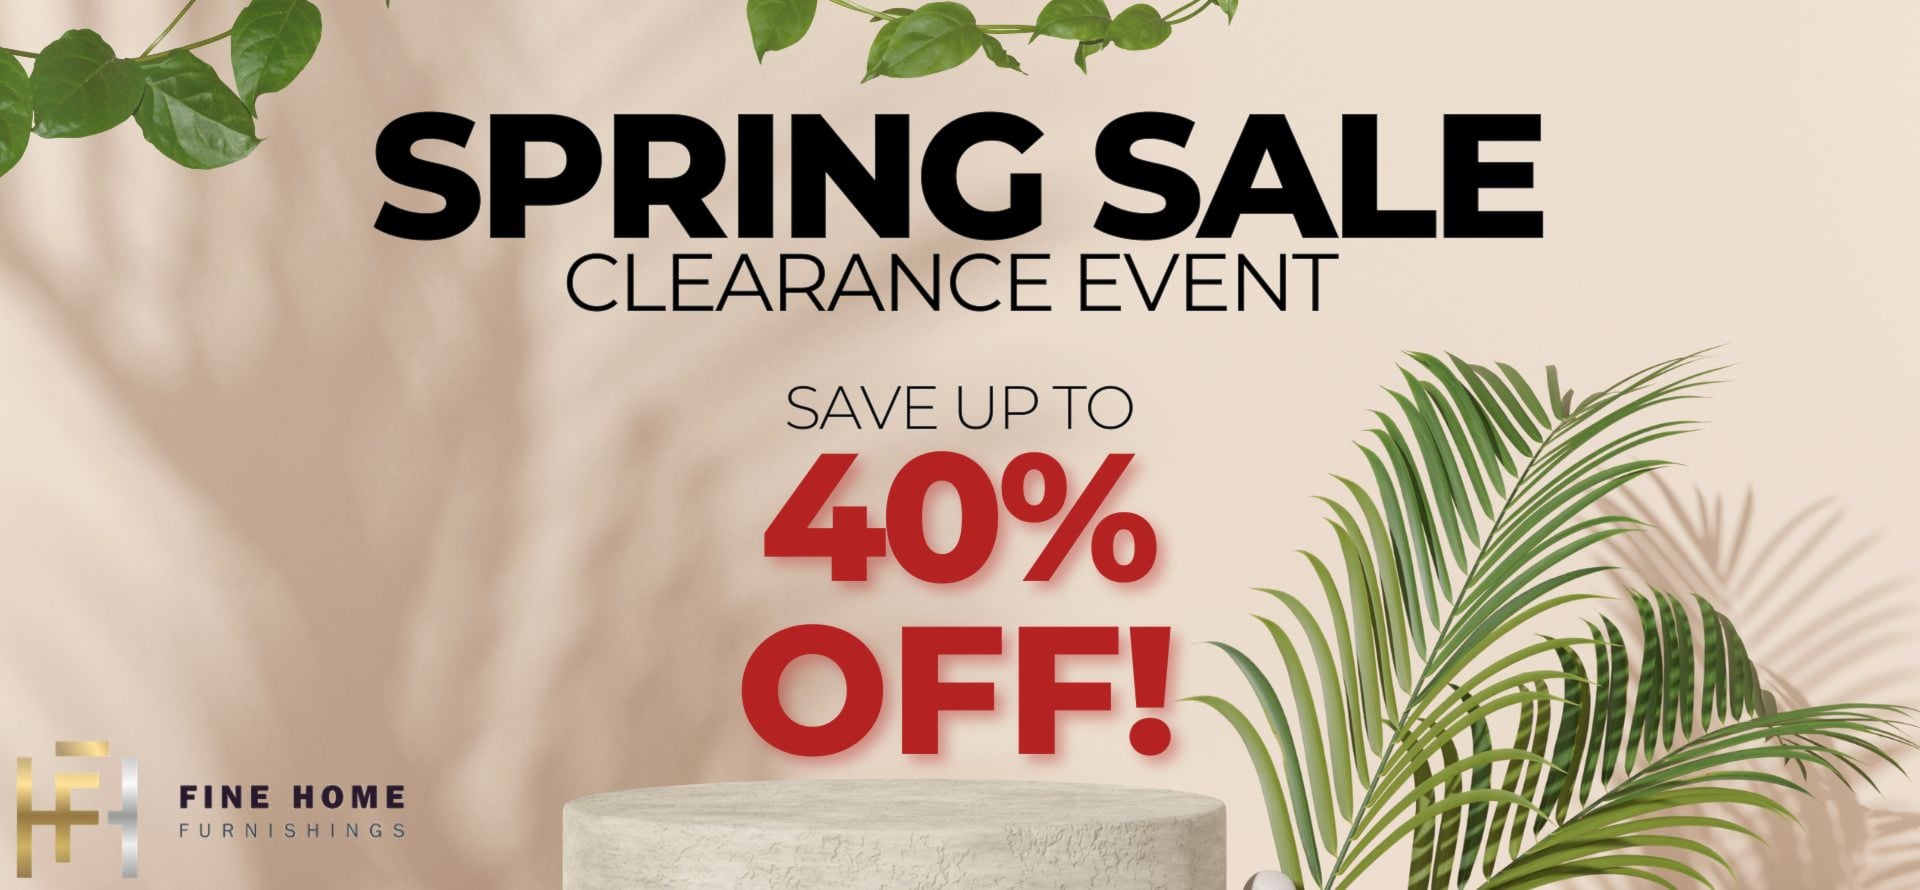 Spring Sale clearance event save up to 40% off!